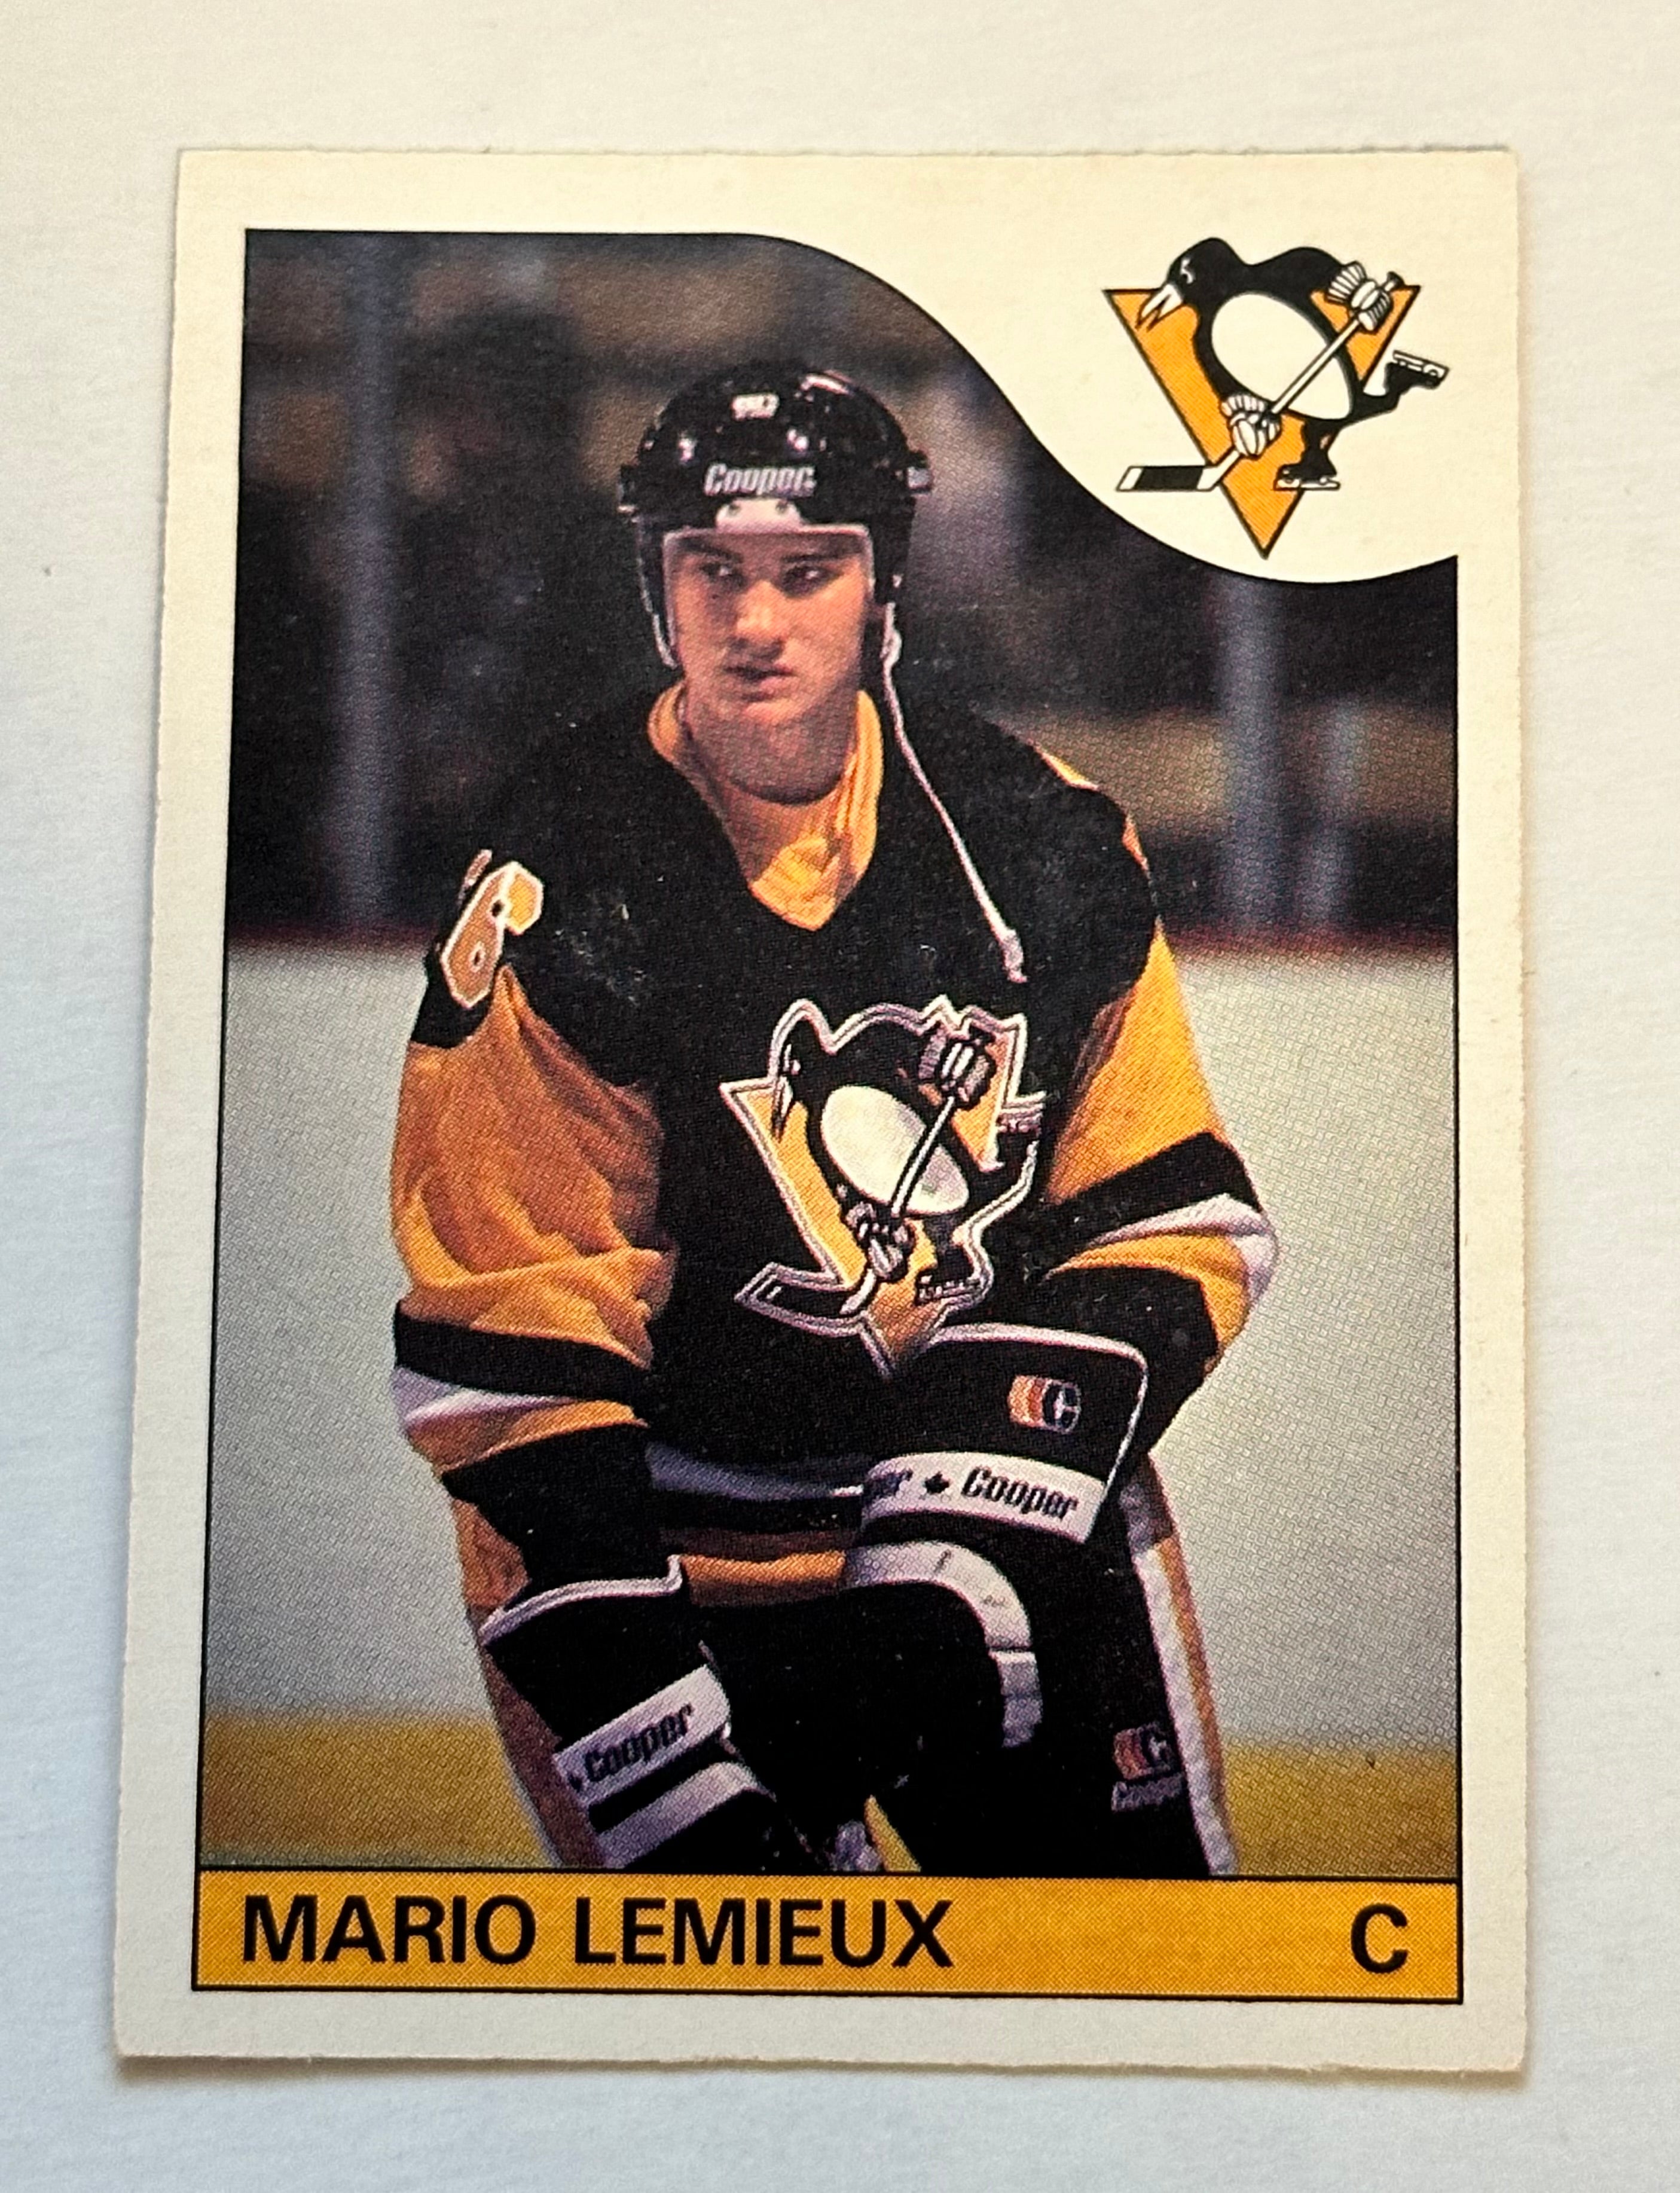 1985-86 Opc hockey cards high grade condition cards set with Mario Lemieux rookie